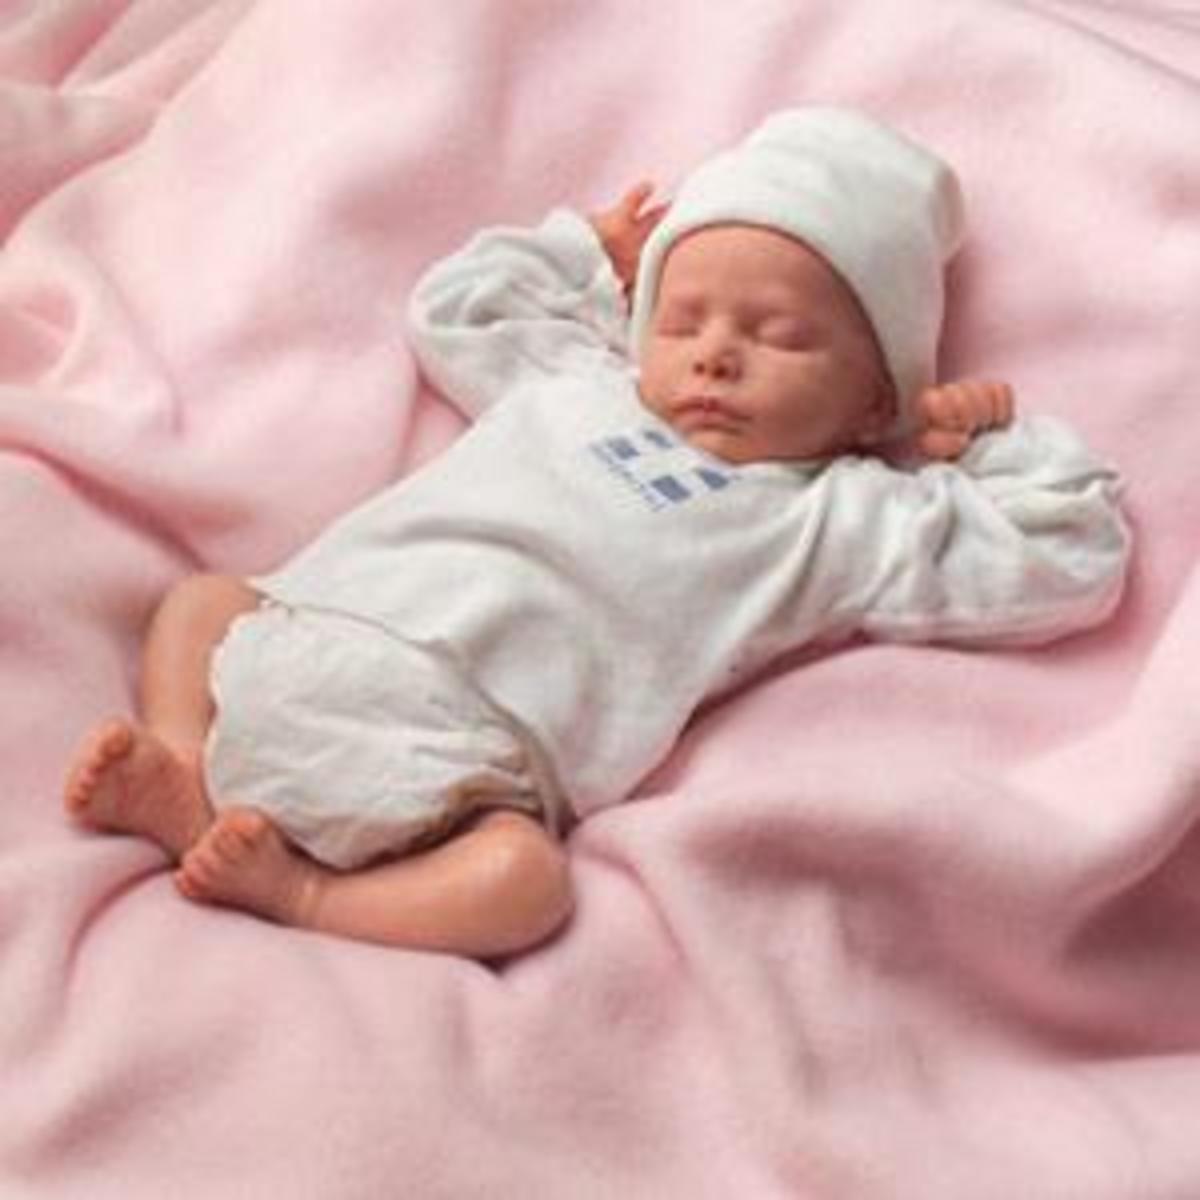 Baby Dolls For Toddlers: Realistic Life like Baby Dolls ...